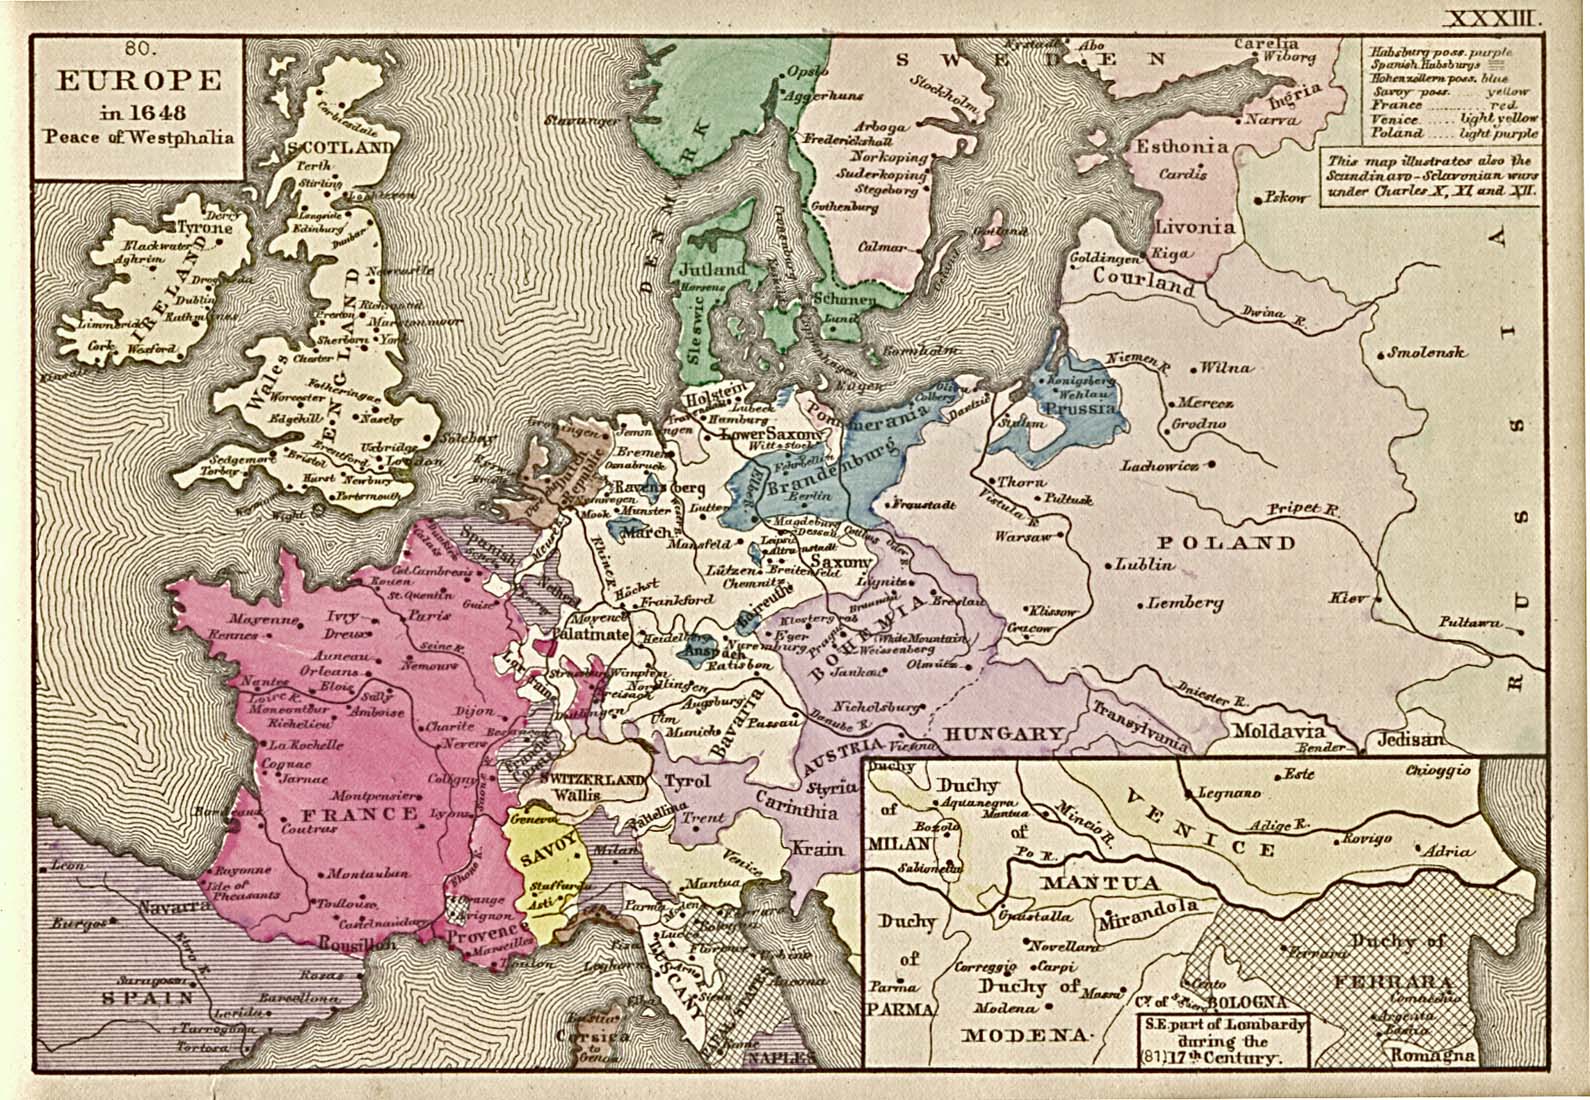 Map of Europe after the Peace of Westphalia (1648)